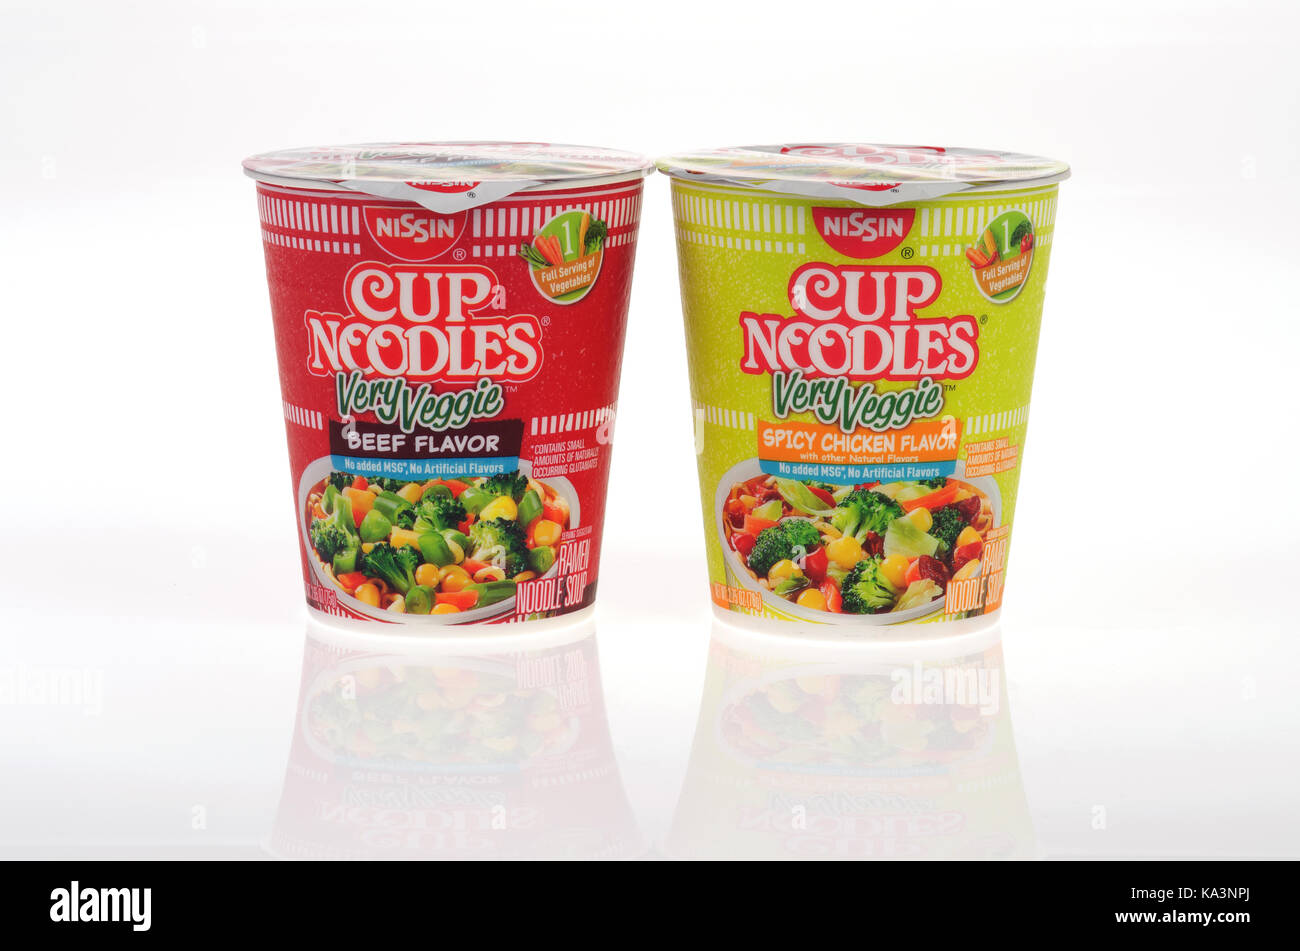 Unopened Nissin Cup of Noodles Very Veggie Beef flavor and spicy chicken flavor soups on white background isolate USA. Stock Photo